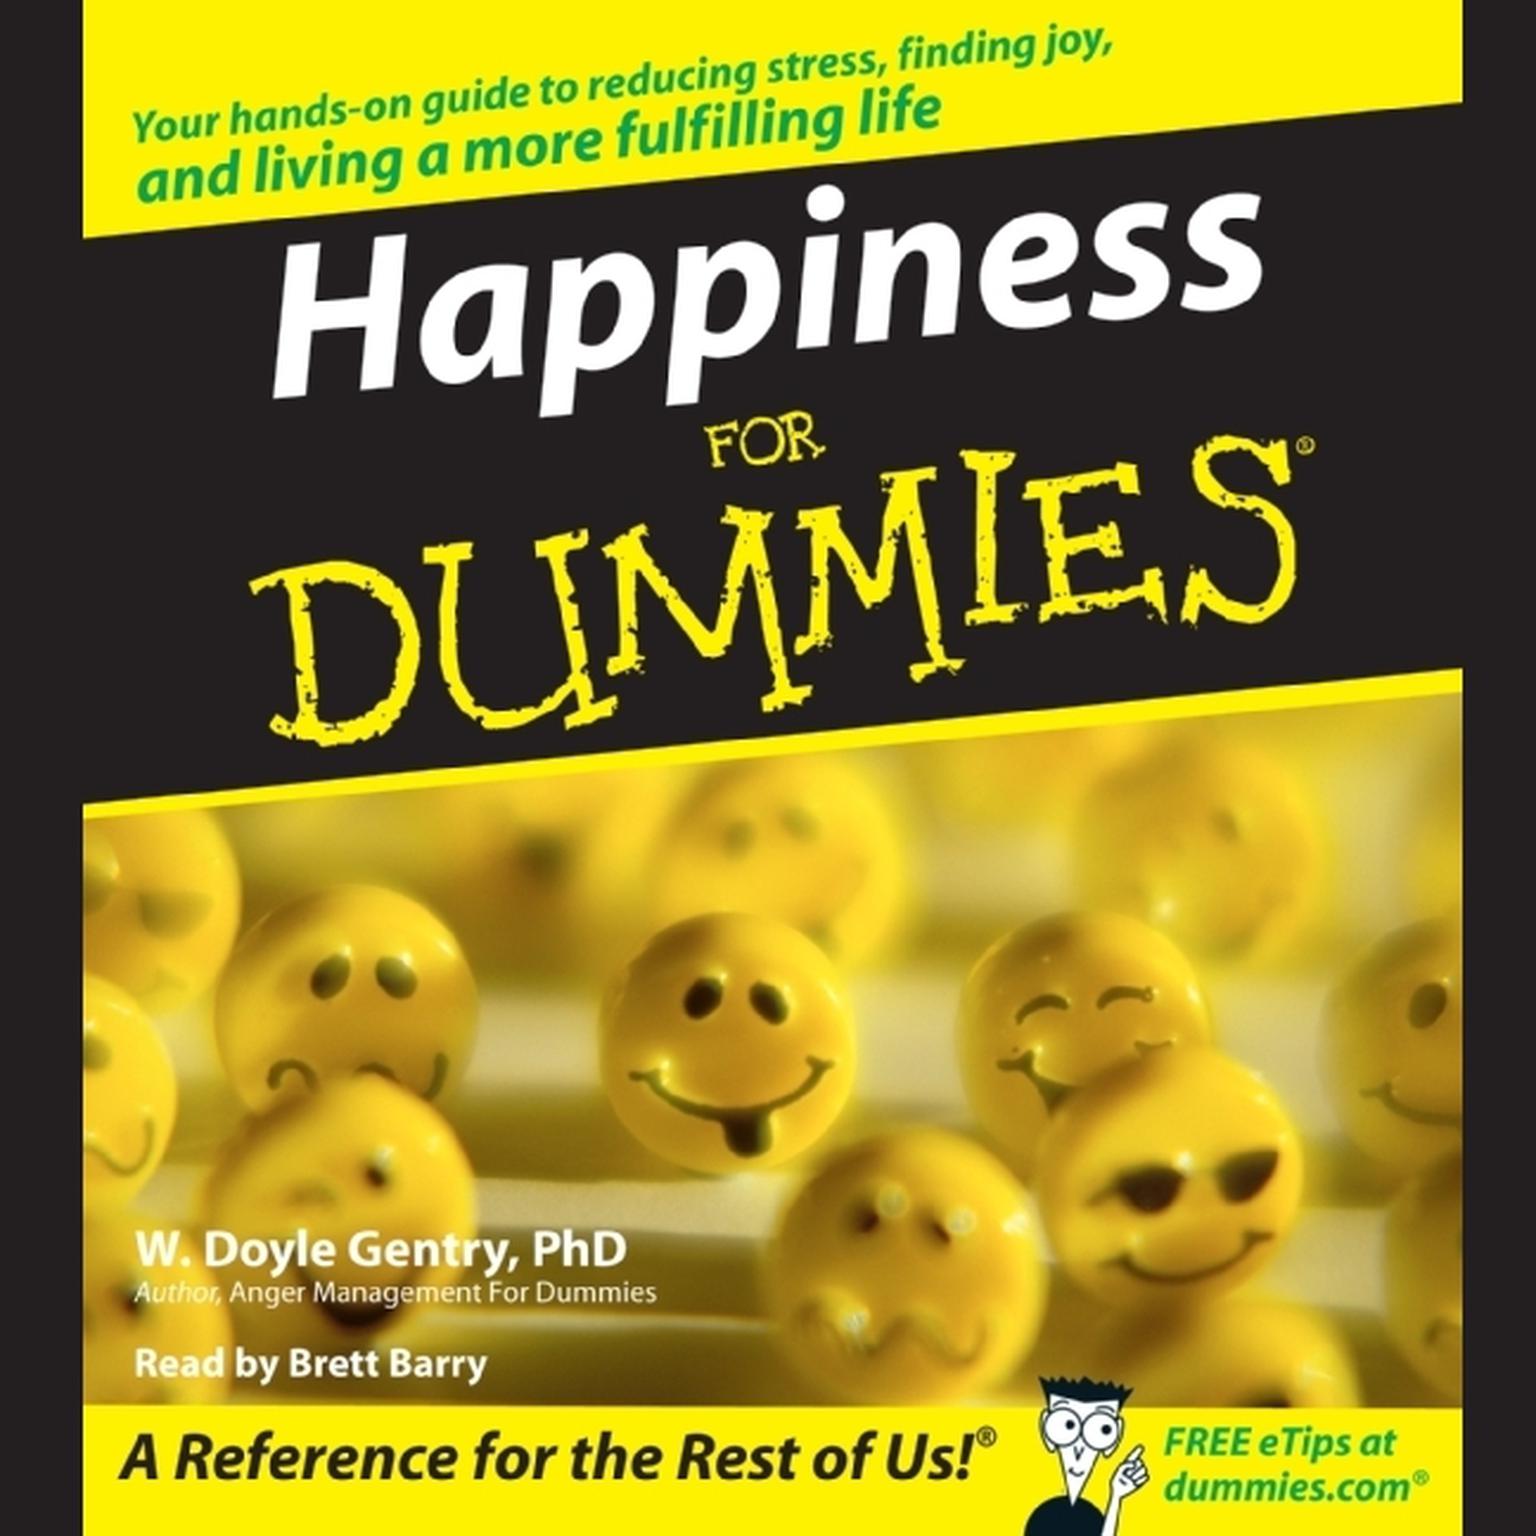 Happiness for Dummies (Abridged) Audiobook, by W. Doyle Gentry